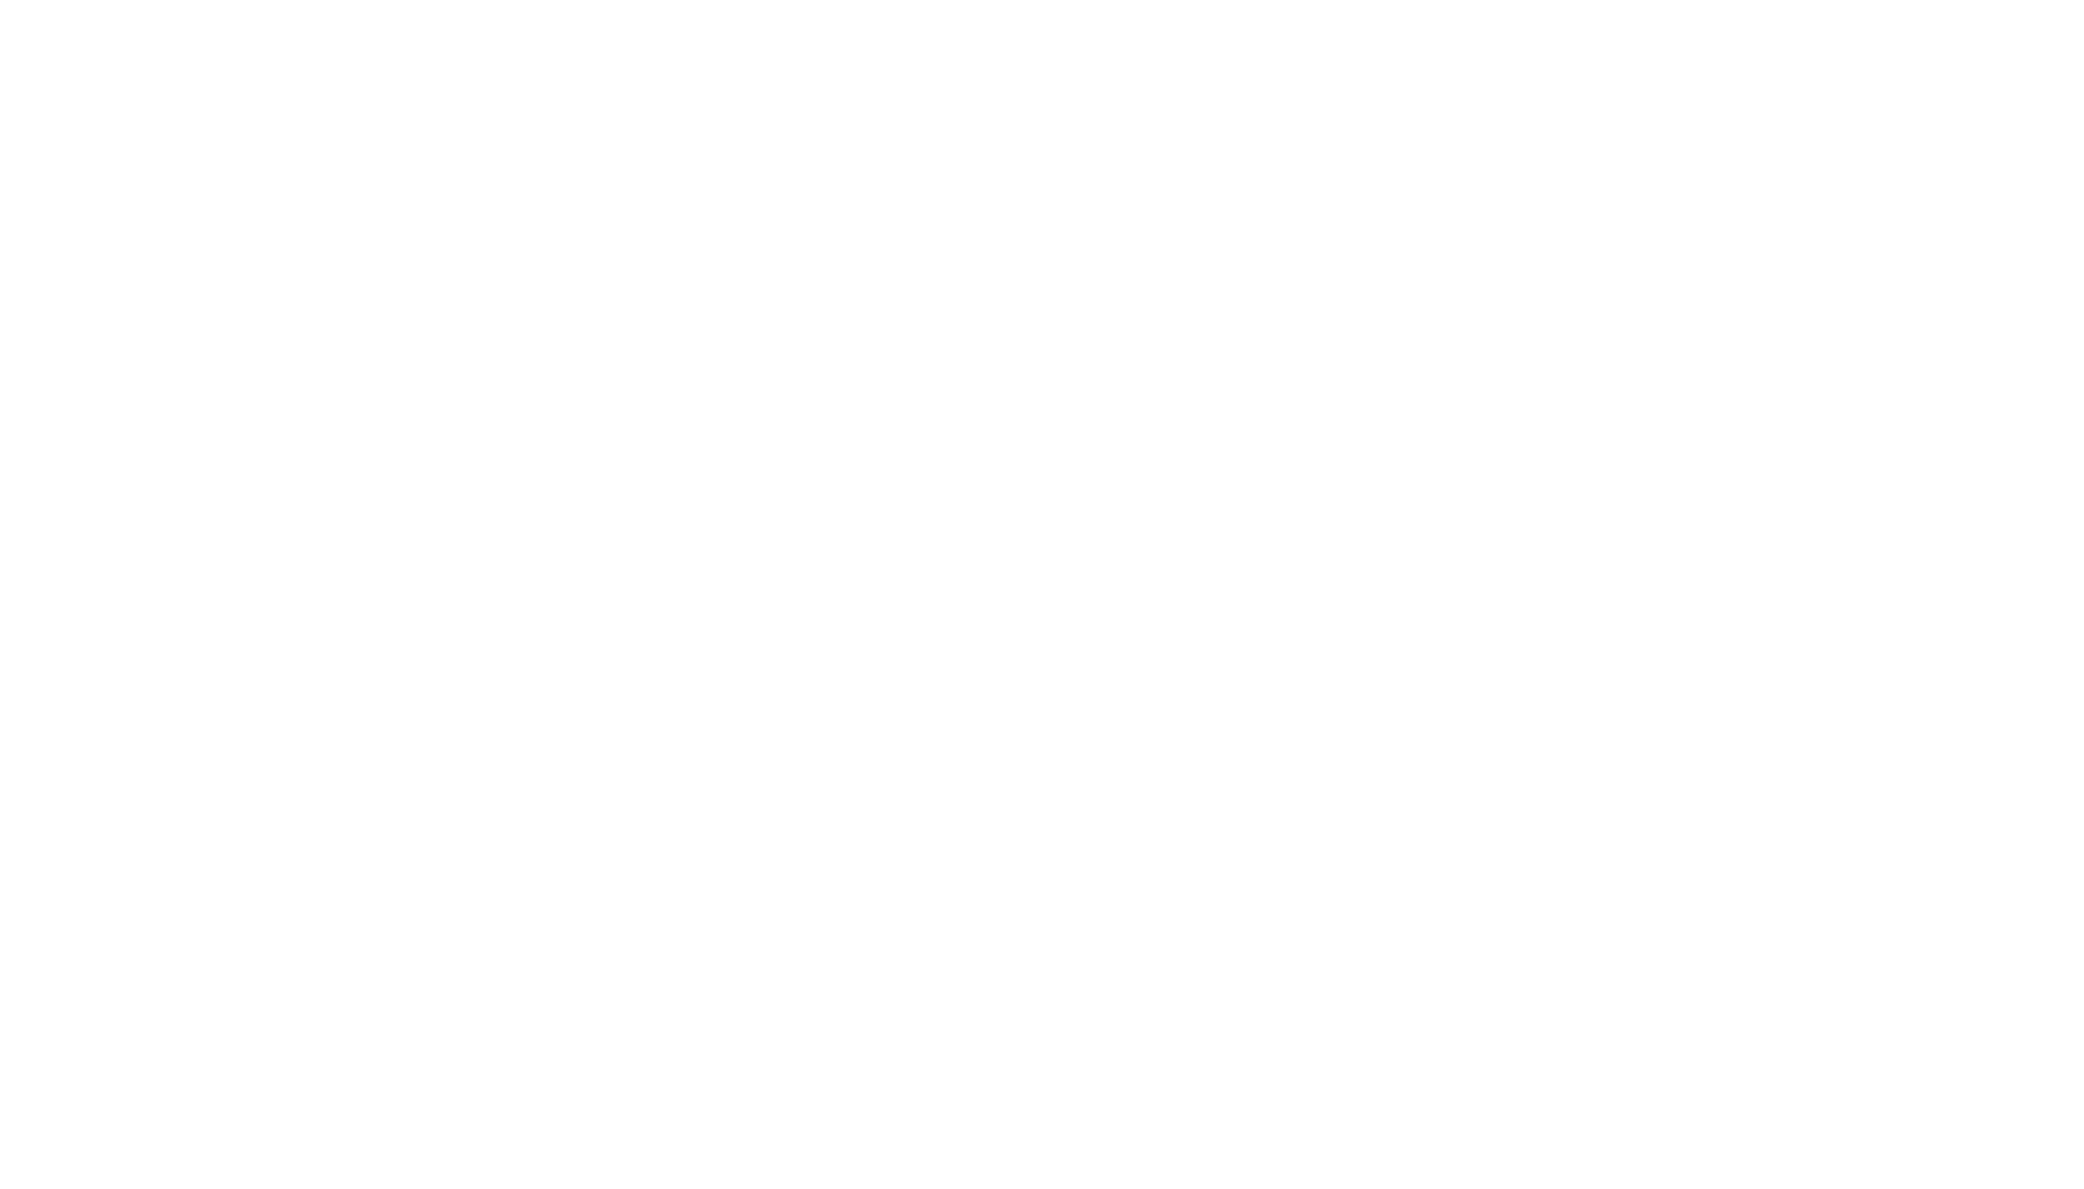 HANGAR CONSULTING GROUP